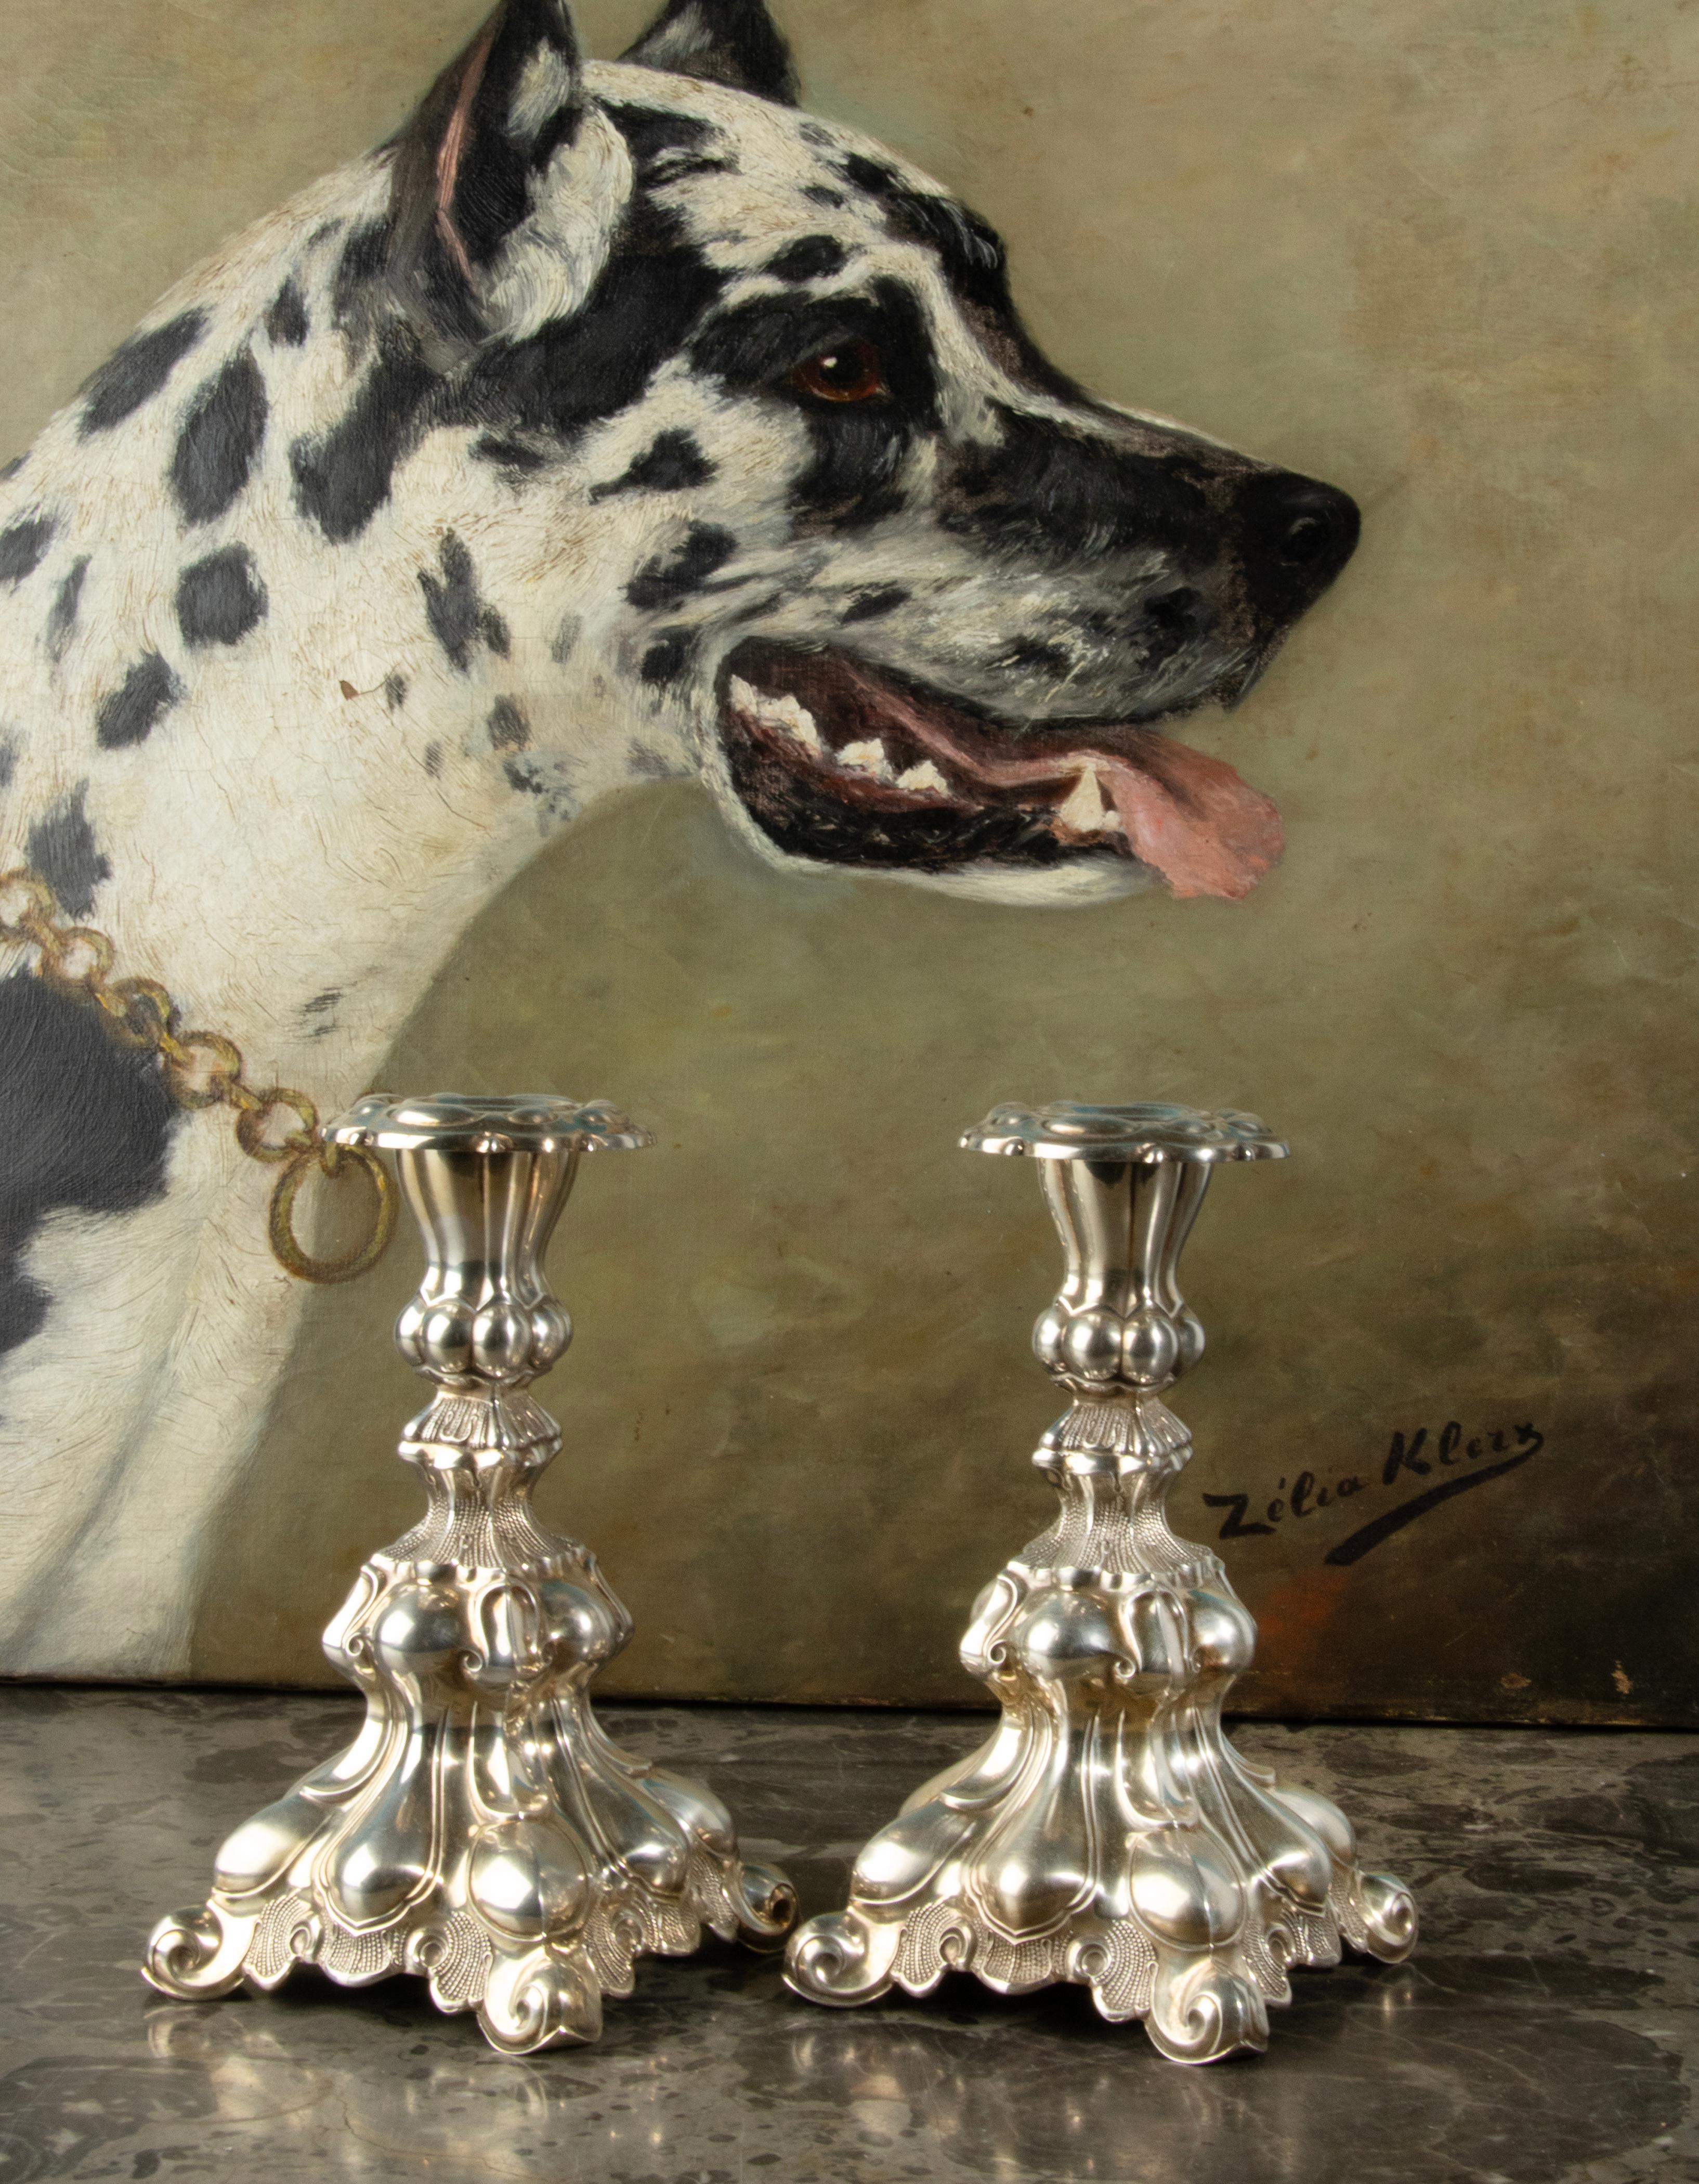 A beautiful pair of silver candlesticks, richly decorated with round shapes in Rococo style. The candlesticks are not hallmarked but have been tested and are solid silver. The foot is weighted from the inside and the bottom is covered with green